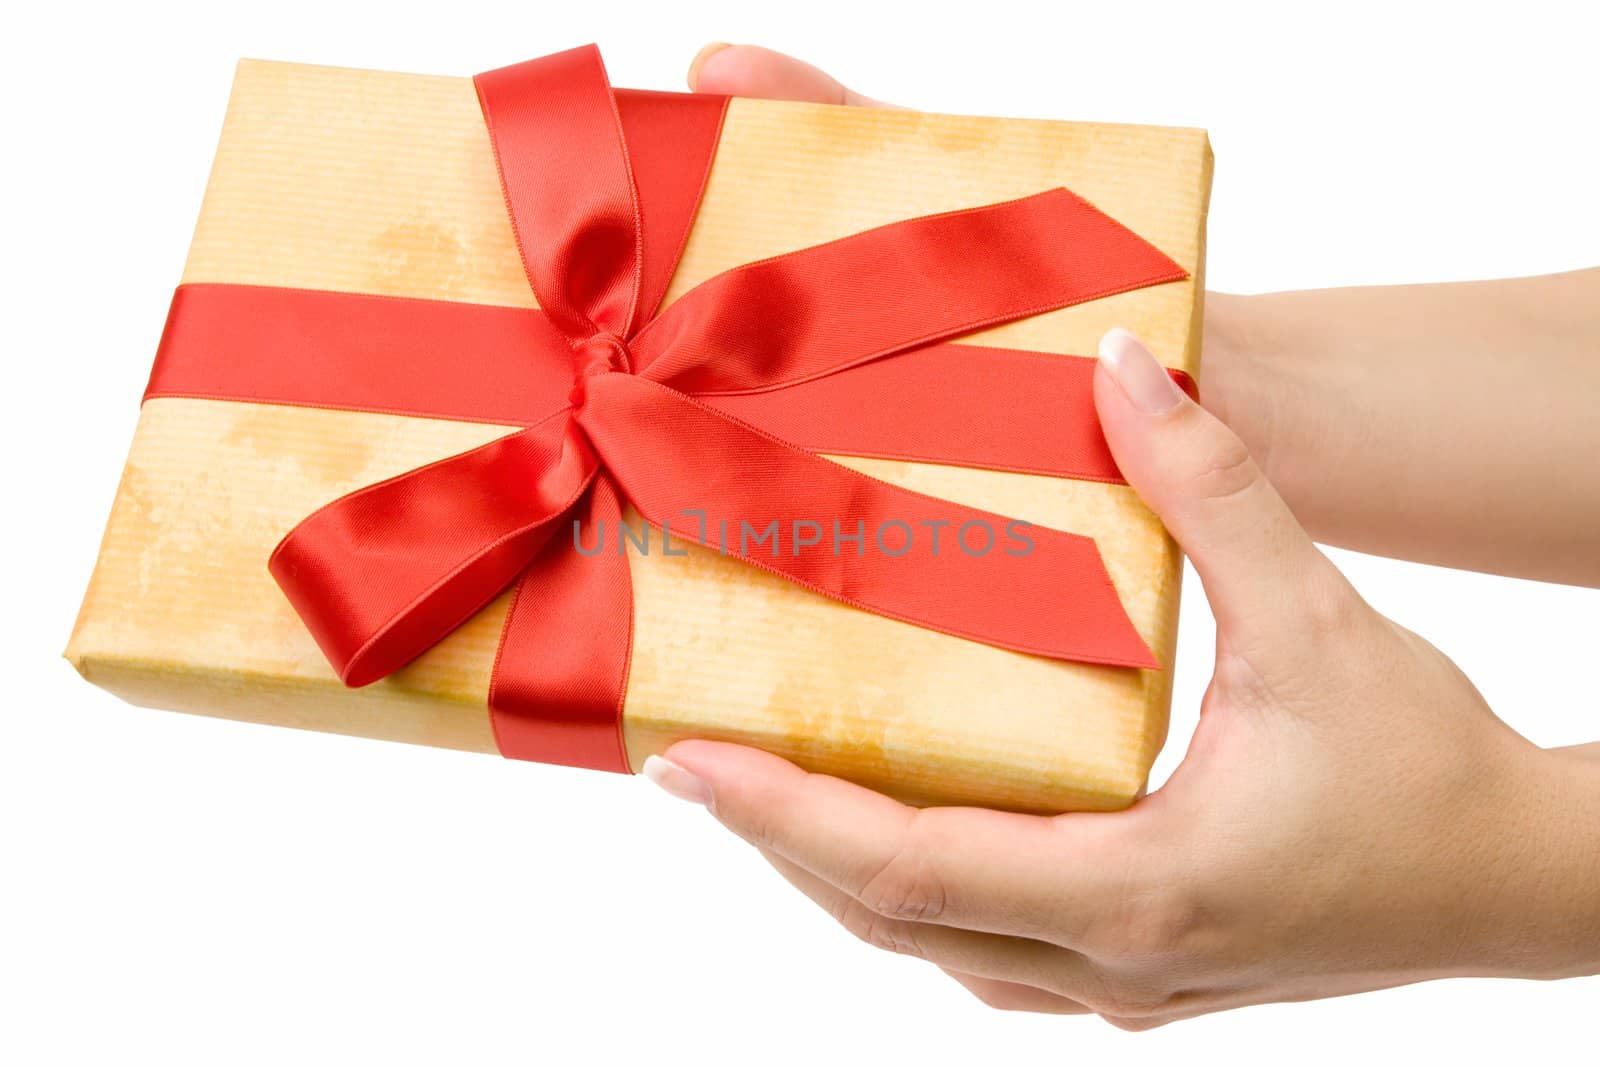 Female hand holding an ornamented gift. Isolated on a white background.